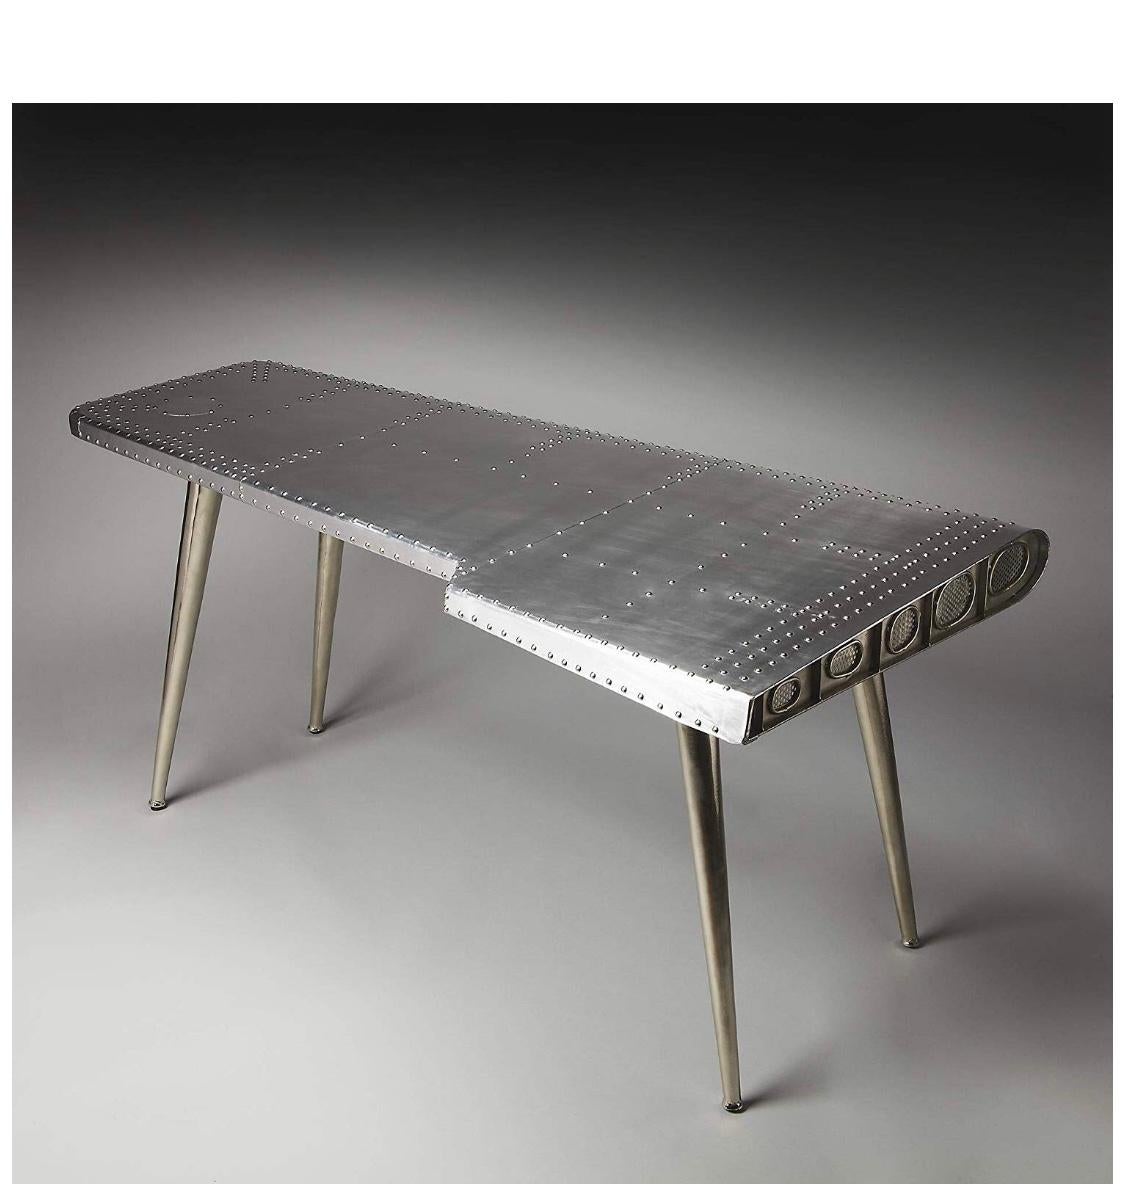 Modern industrial silver “airplane” wing writing desk table for the home or office.

Modern, eye-catching design adds a sleek look to your home or office
Made from very high-quality MDF wood, iron and aluminum
Strong and sturdy
Very easy to clean